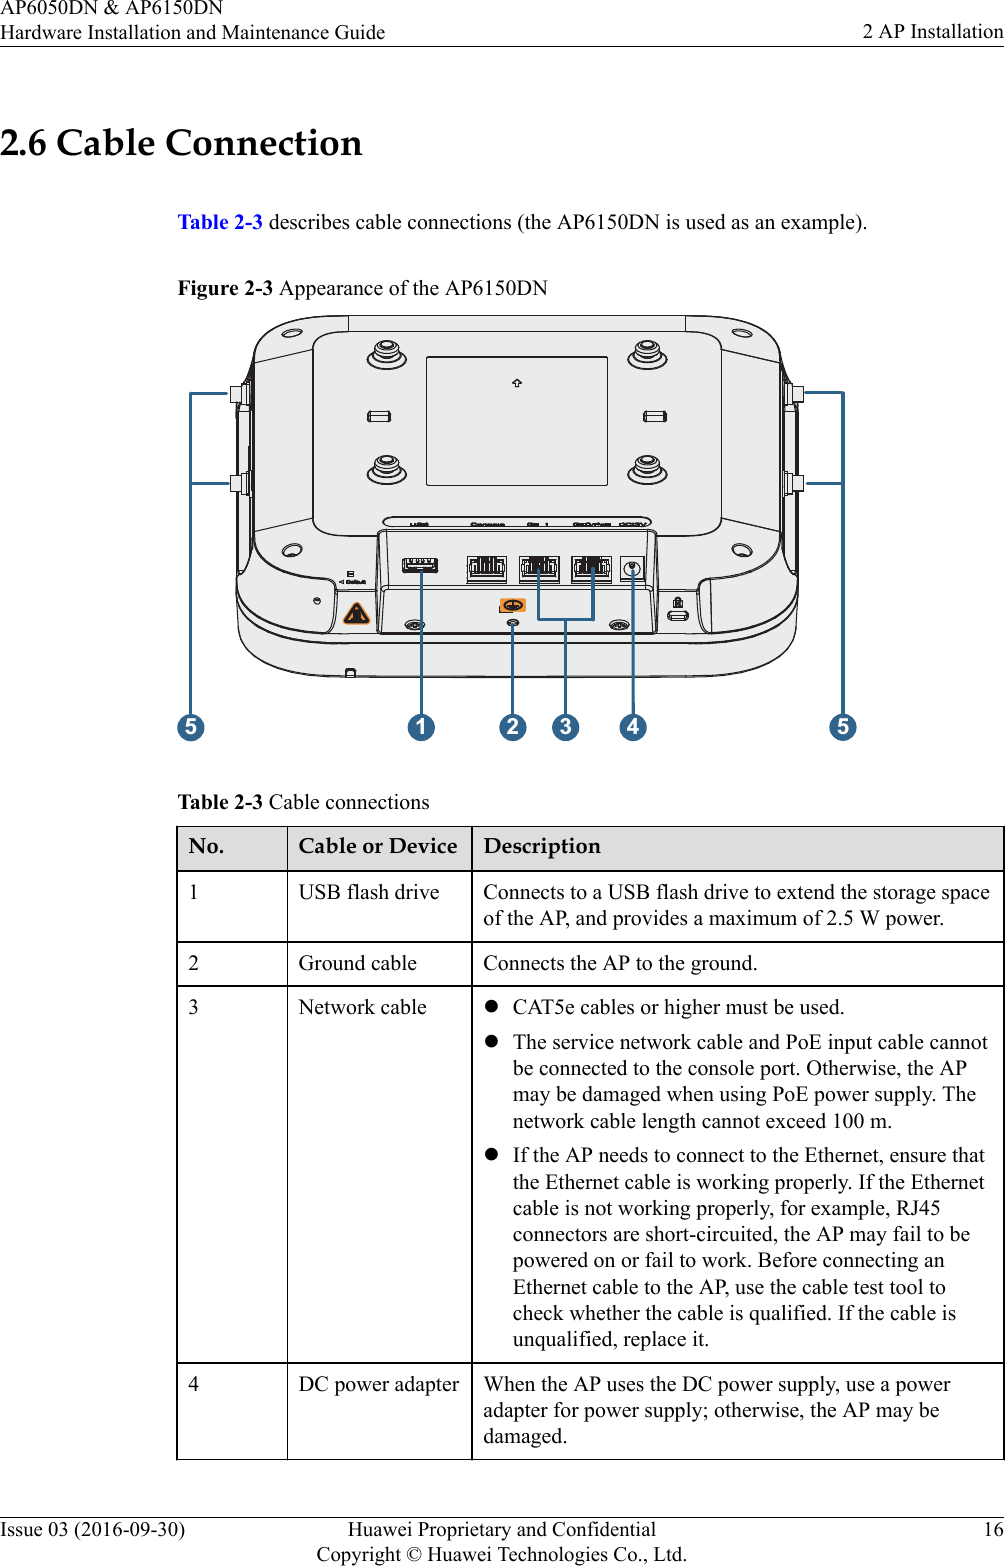 2.6 Cable ConnectionTable 2-3 describes cable connections (the AP6150DN is used as an example).Figure 2-3 Appearance of the AP6150DN143552Table 2-3 Cable connectionsNo. Cable or Device Description1 USB flash drive Connects to a USB flash drive to extend the storage spaceof the AP, and provides a maximum of 2.5 W power.2 Ground cable Connects the AP to the ground.3 Network cable lCAT5e cables or higher must be used.lThe service network cable and PoE input cable cannotbe connected to the console port. Otherwise, the APmay be damaged when using PoE power supply. Thenetwork cable length cannot exceed 100 m.lIf the AP needs to connect to the Ethernet, ensure thatthe Ethernet cable is working properly. If the Ethernetcable is not working properly, for example, RJ45connectors are short-circuited, the AP may fail to bepowered on or fail to work. Before connecting anEthernet cable to the AP, use the cable test tool tocheck whether the cable is qualified. If the cable isunqualified, replace it.4 DC power adapter When the AP uses the DC power supply, use a poweradapter for power supply; otherwise, the AP may bedamaged.AP6050DN &amp; AP6150DNHardware Installation and Maintenance Guide 2 AP InstallationIssue 03 (2016-09-30) Huawei Proprietary and ConfidentialCopyright © Huawei Technologies Co., Ltd.16